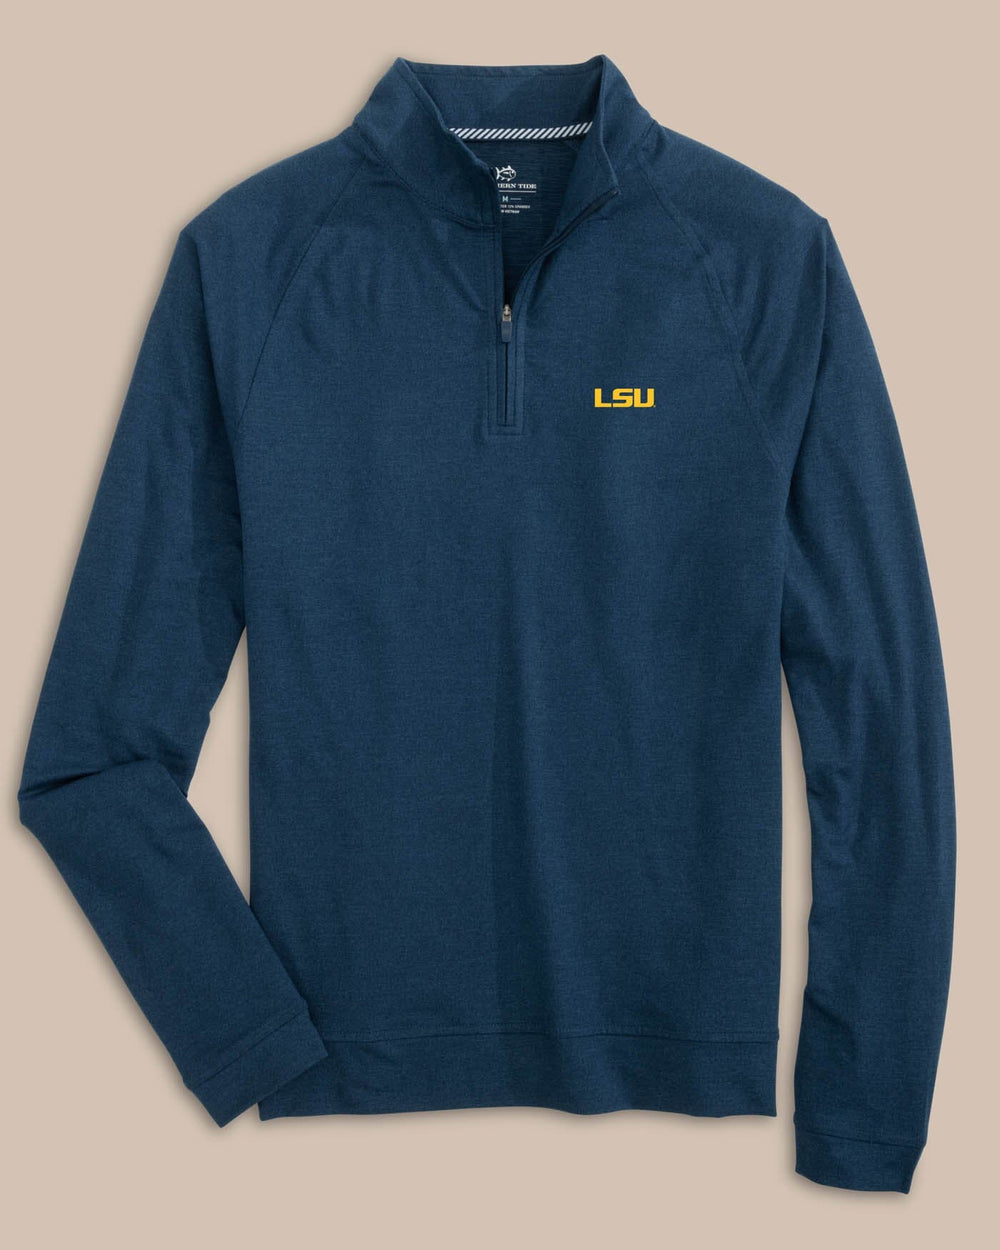 The front view of the LSU Tigers Cruiser Heather Quarter Zip Pullover by Southern Tide - Heather Dress Blue